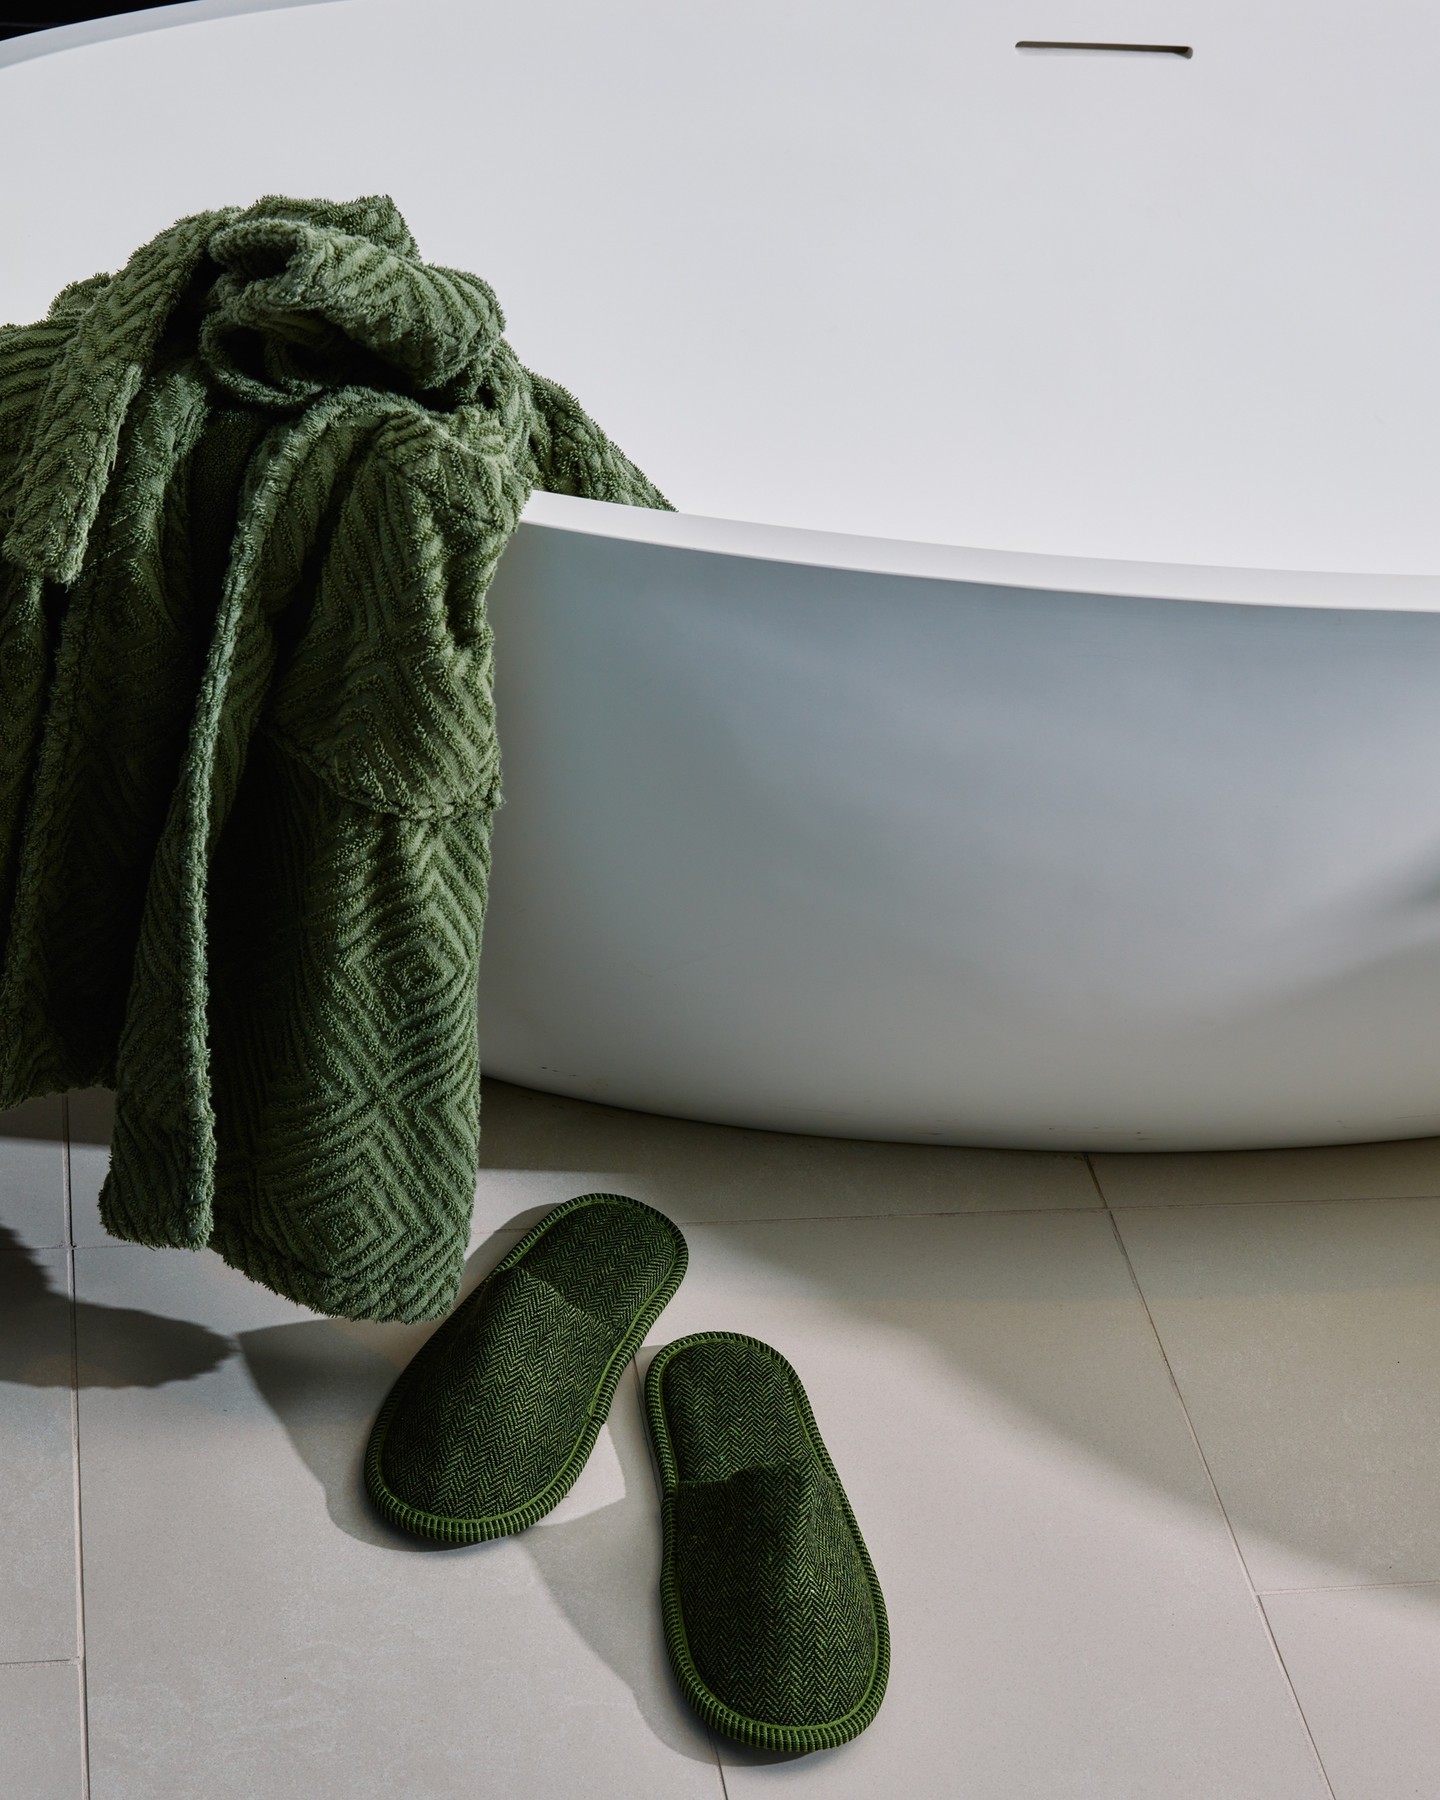 relaxation looks good on you. destress and decompress in our soaking tub and then get cozy in our robe and slippers